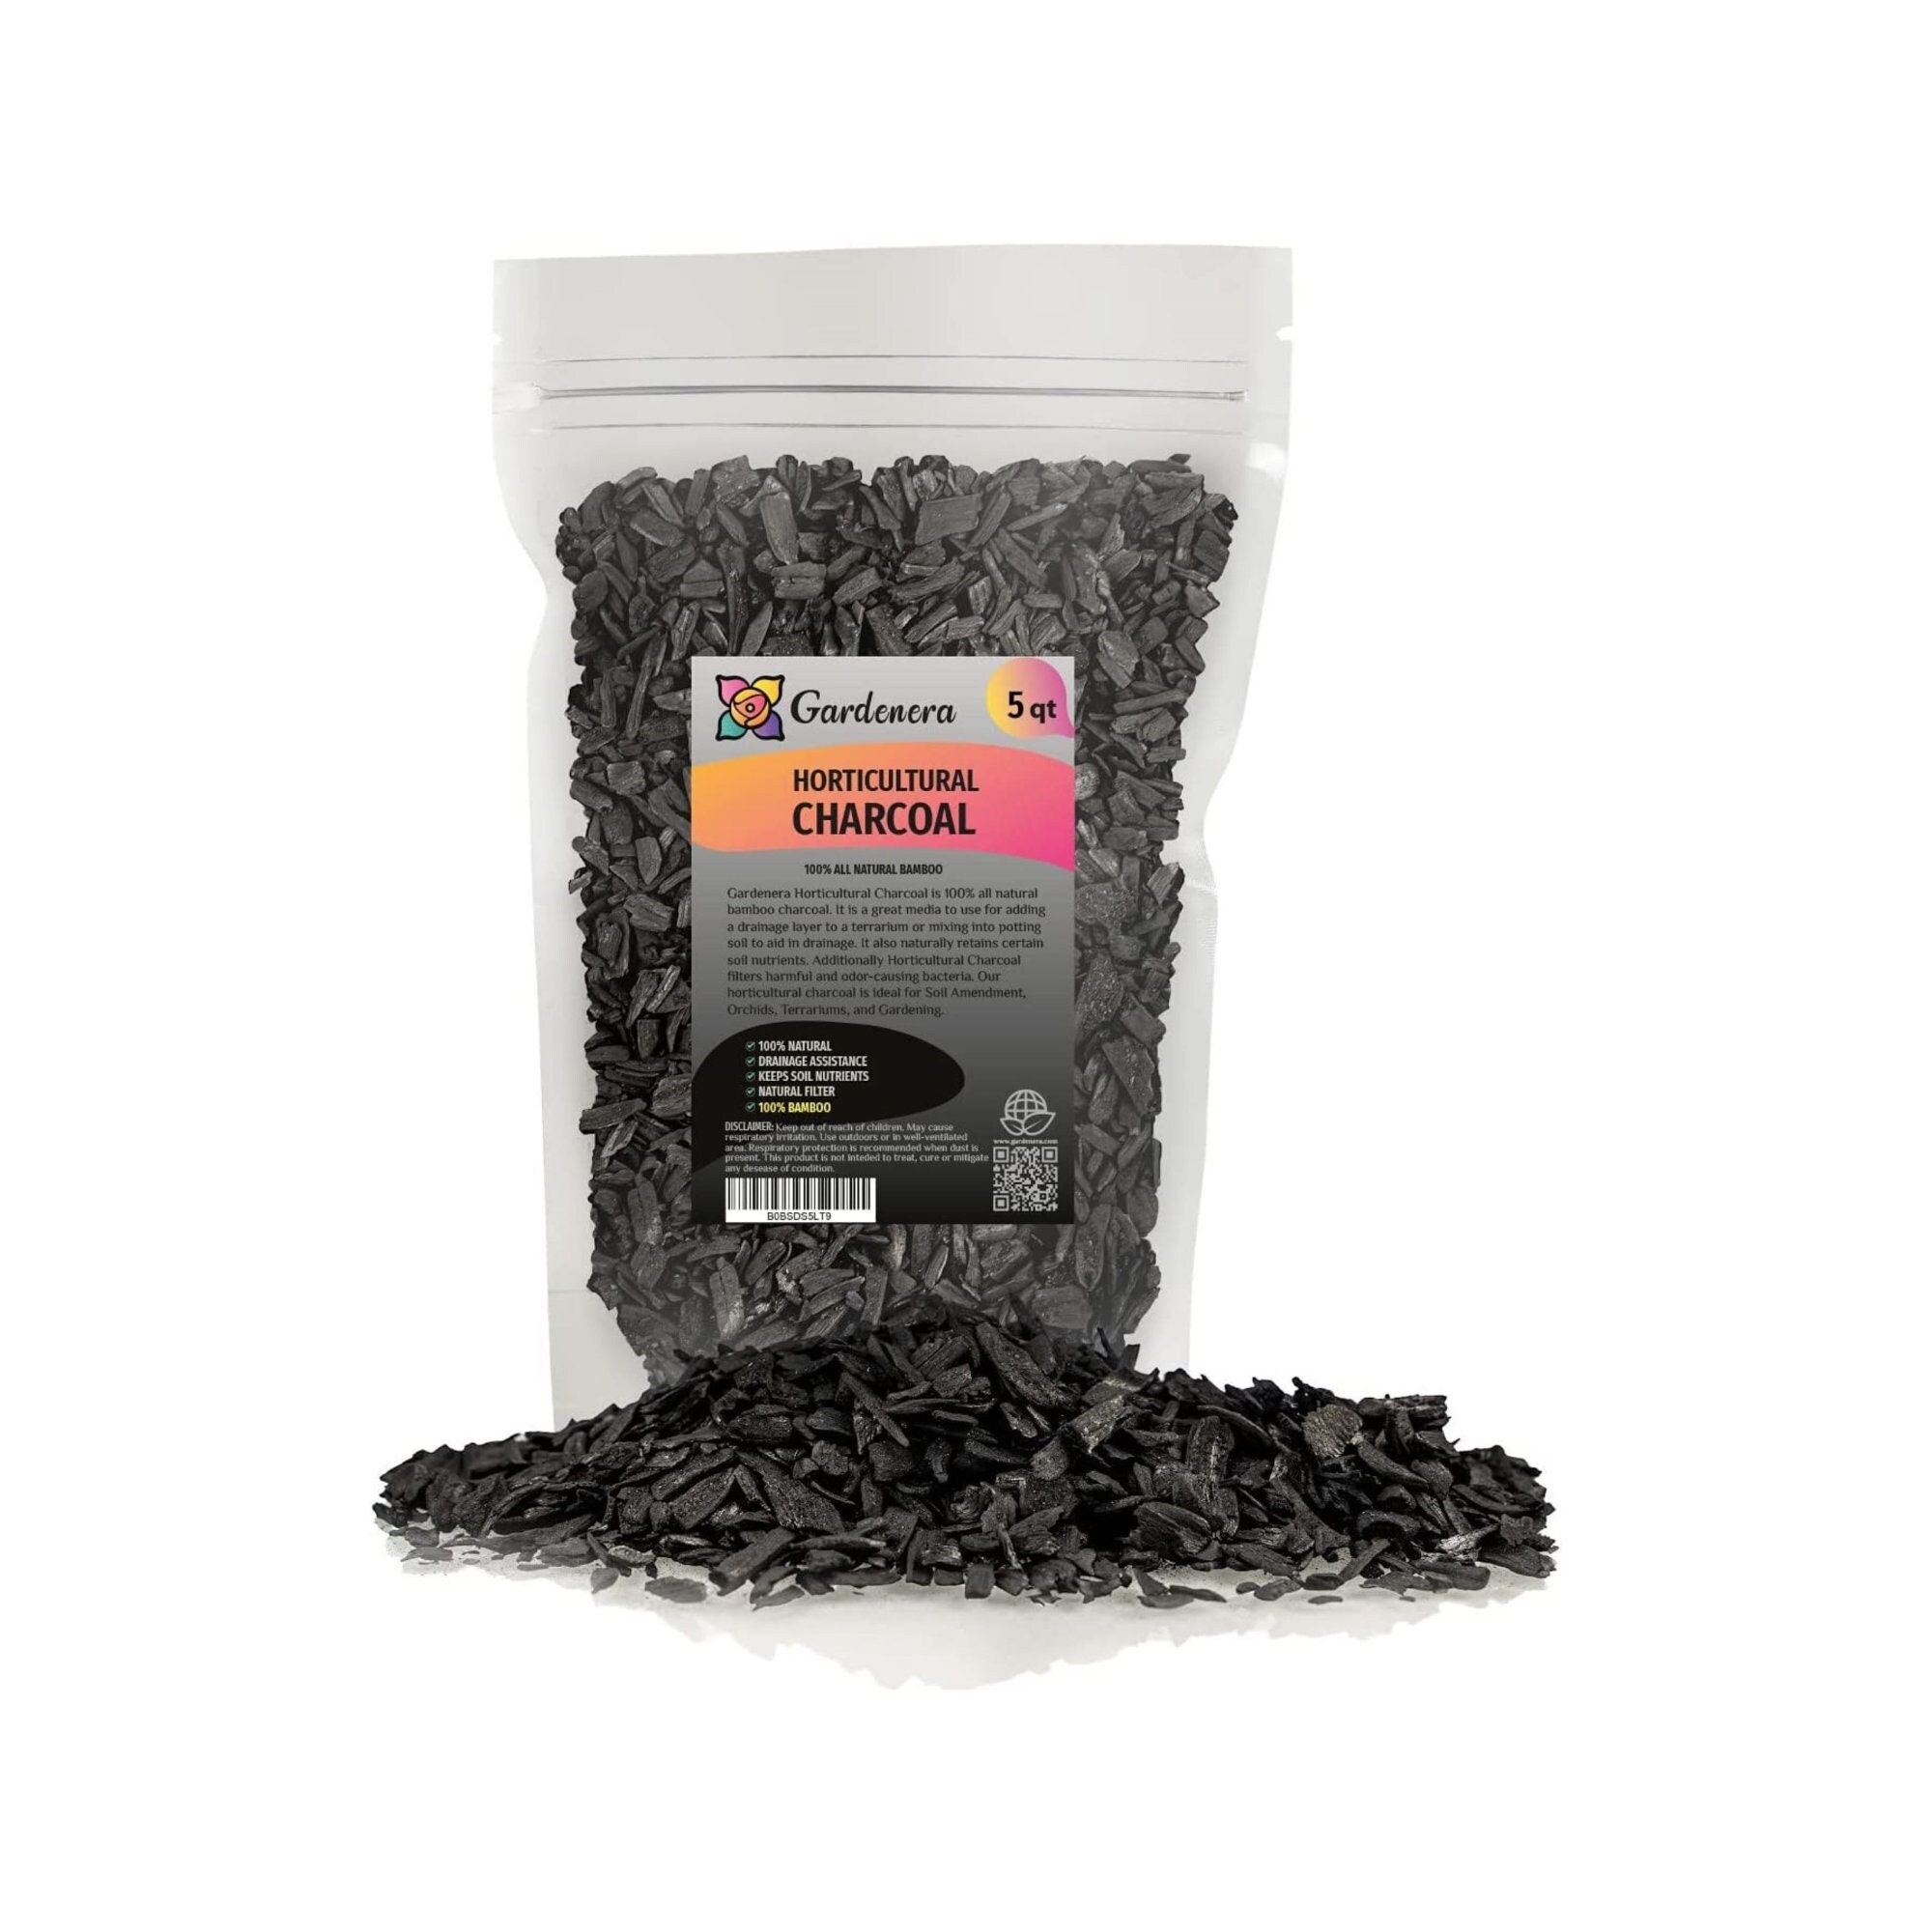 GARDENERA Horticultural Charcoal for Indoor Plants, Black Diamond Soil  Amendment for Orchids, Terrariums, and Gardening 